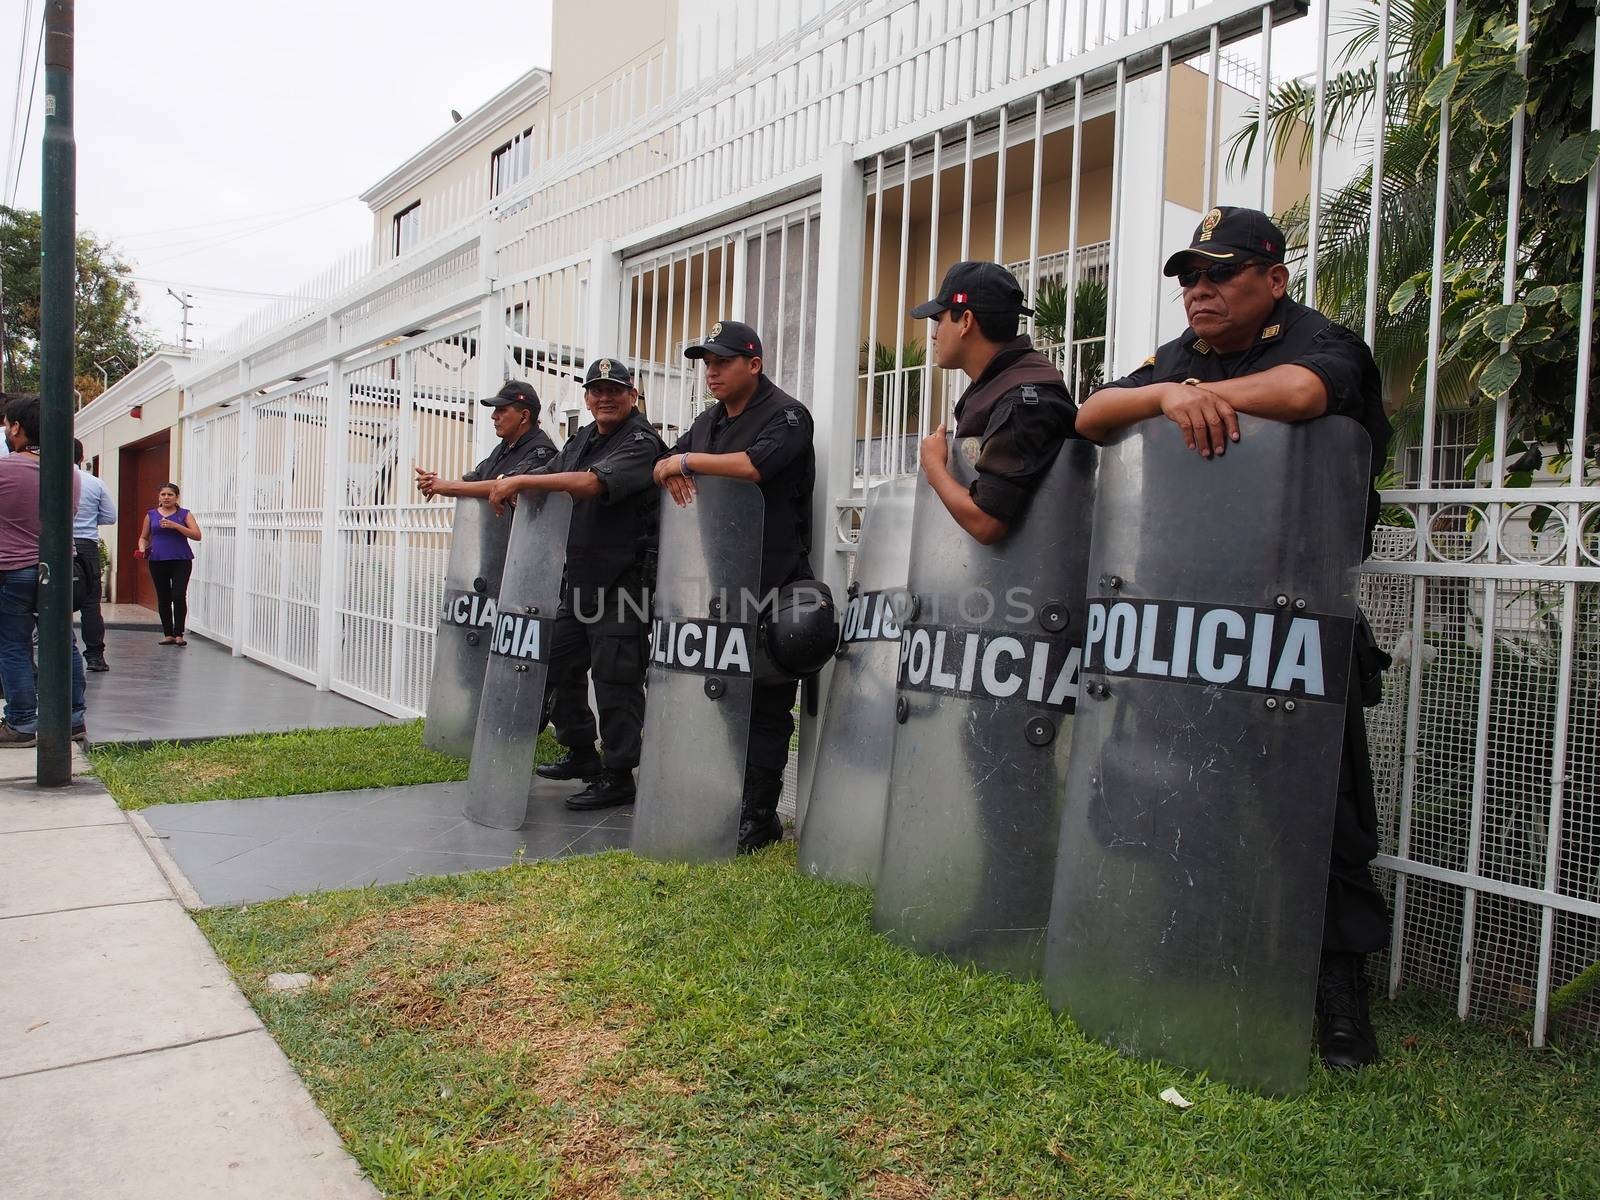 PERU, Lima : Peruvian police guard the entrance of the Mossack Fonseca offices during a raid in Lima on April 11, 2016.Peruvian authorities raided a branch of Mossack Fonseca in Lima, which is located directly across the road from the Panamanian embassy. They said they were looking for evidence Peruvians used the firm for tax avoidance. /